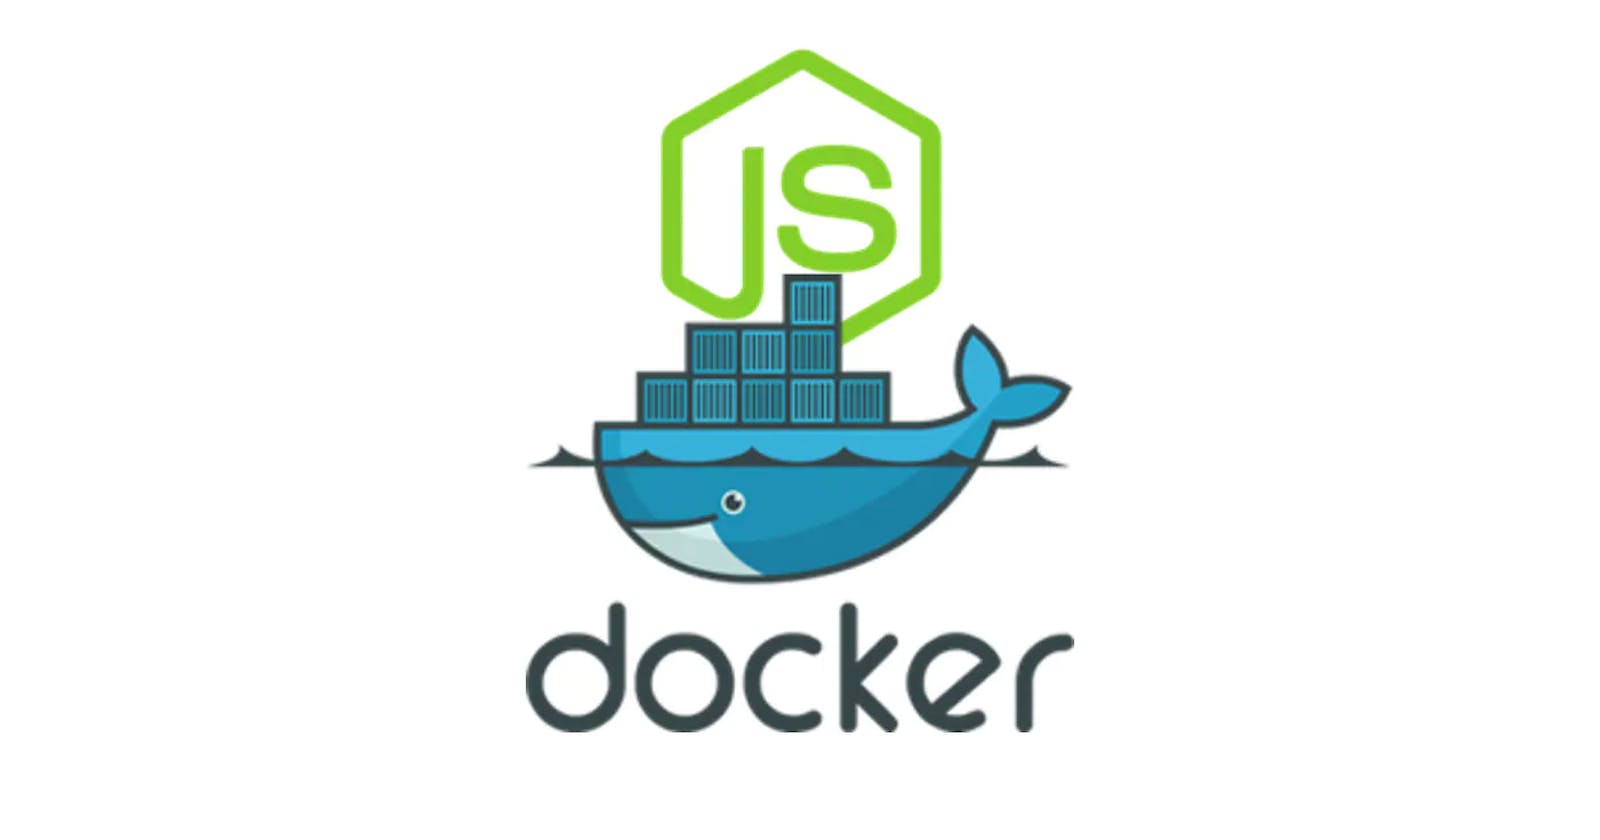 Creating three simple micro-services using NodeJS and deploying them using Docker + Kubernetes